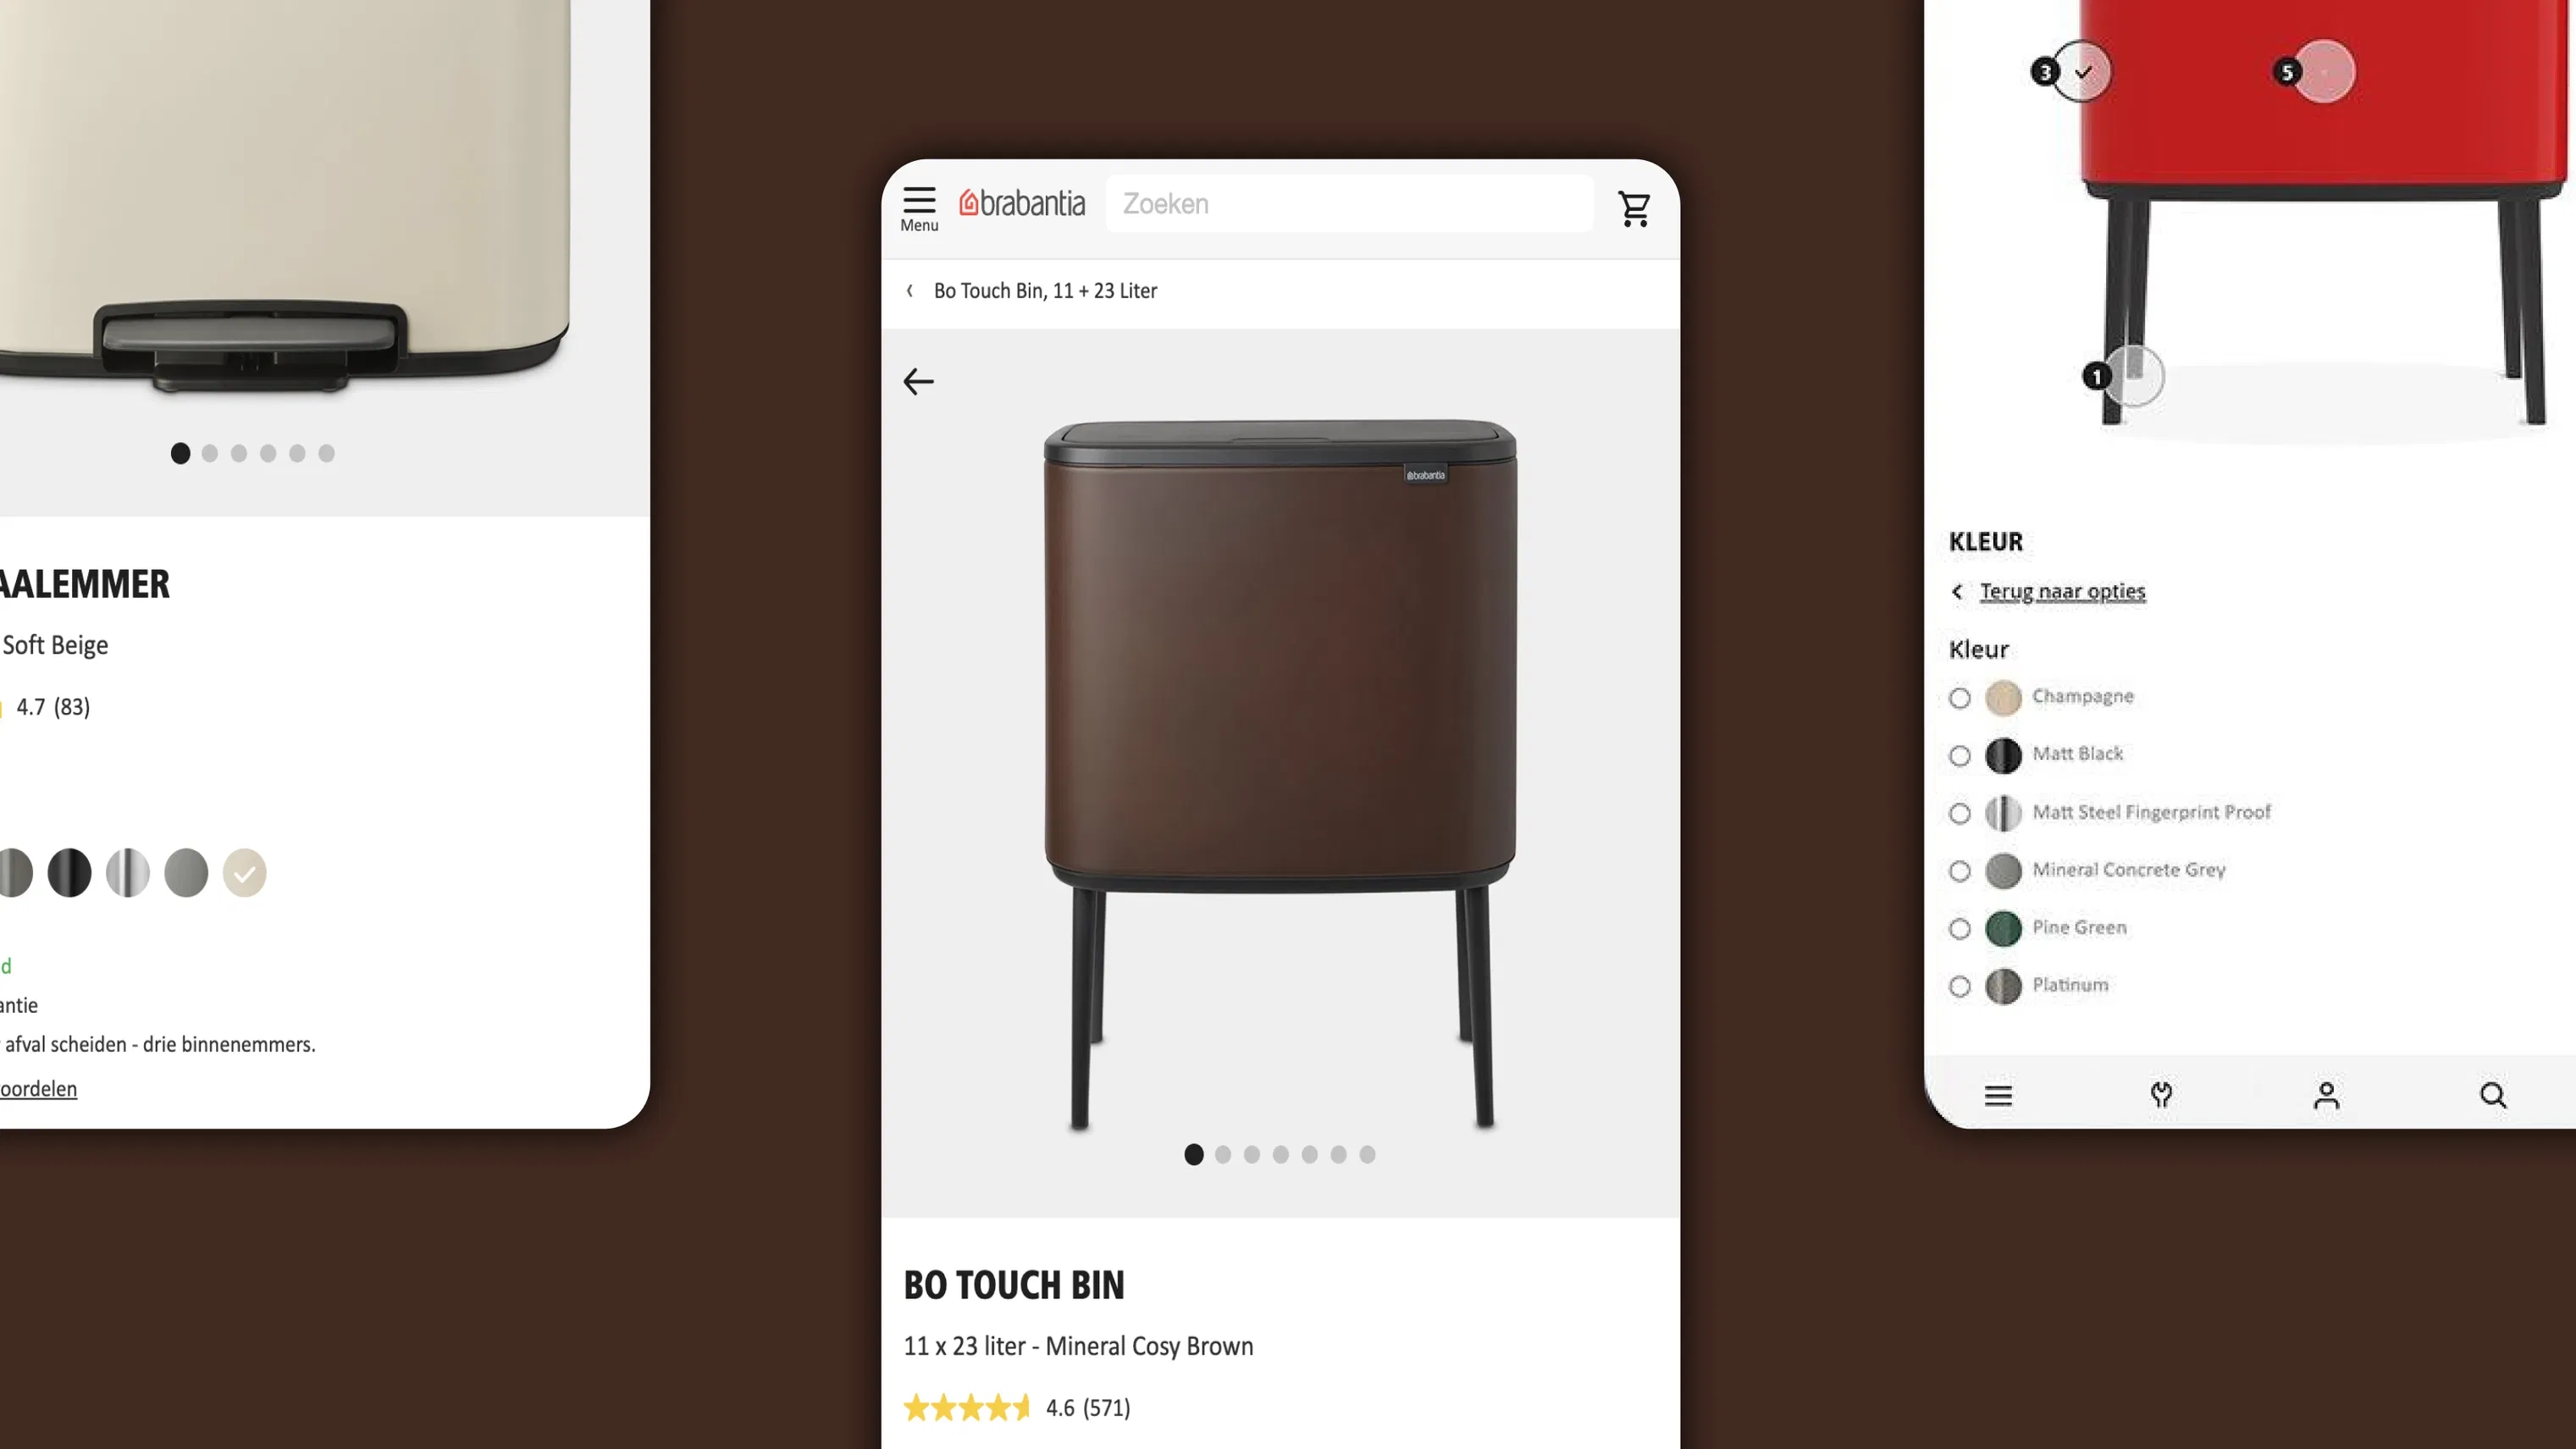 An overview of the Brabantia website